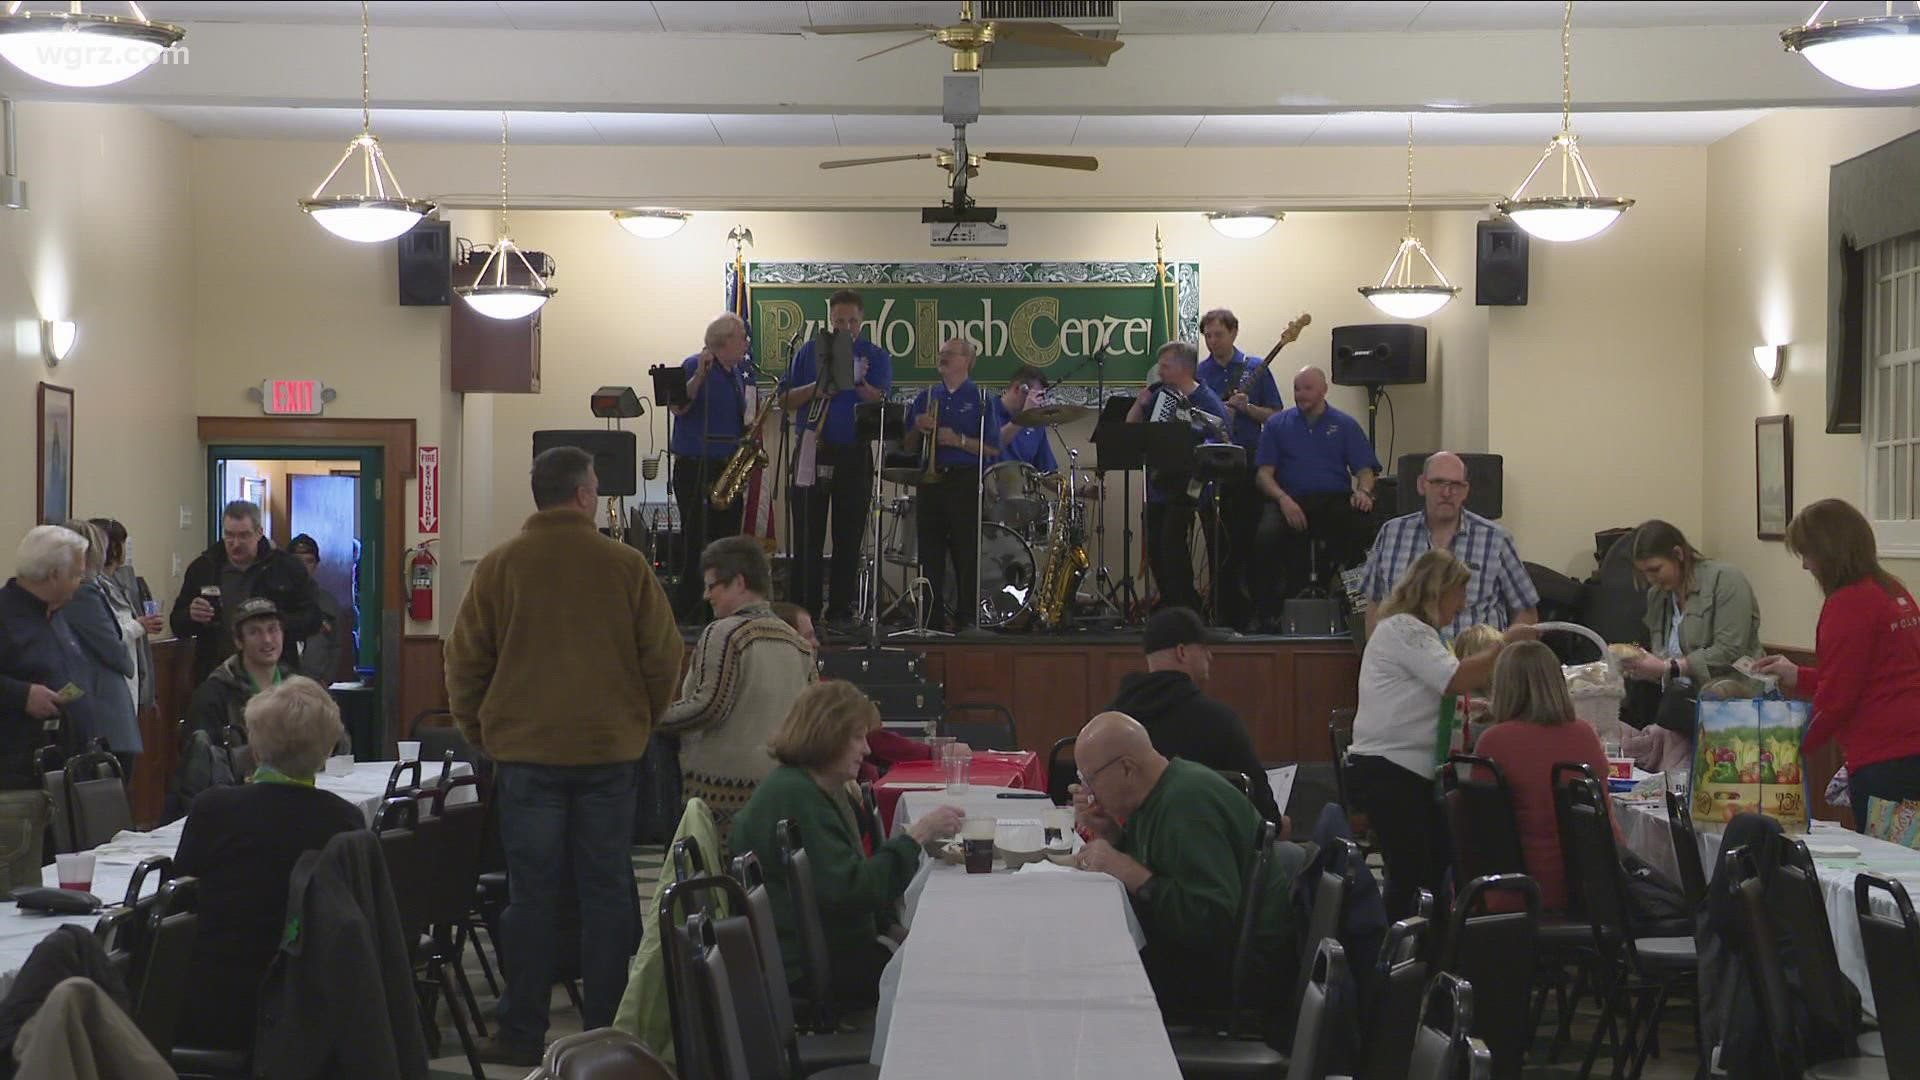 The event was a way to celebrate Saint Patrick's Day, Saint Joseph's Day and Dyngus Day all at once!